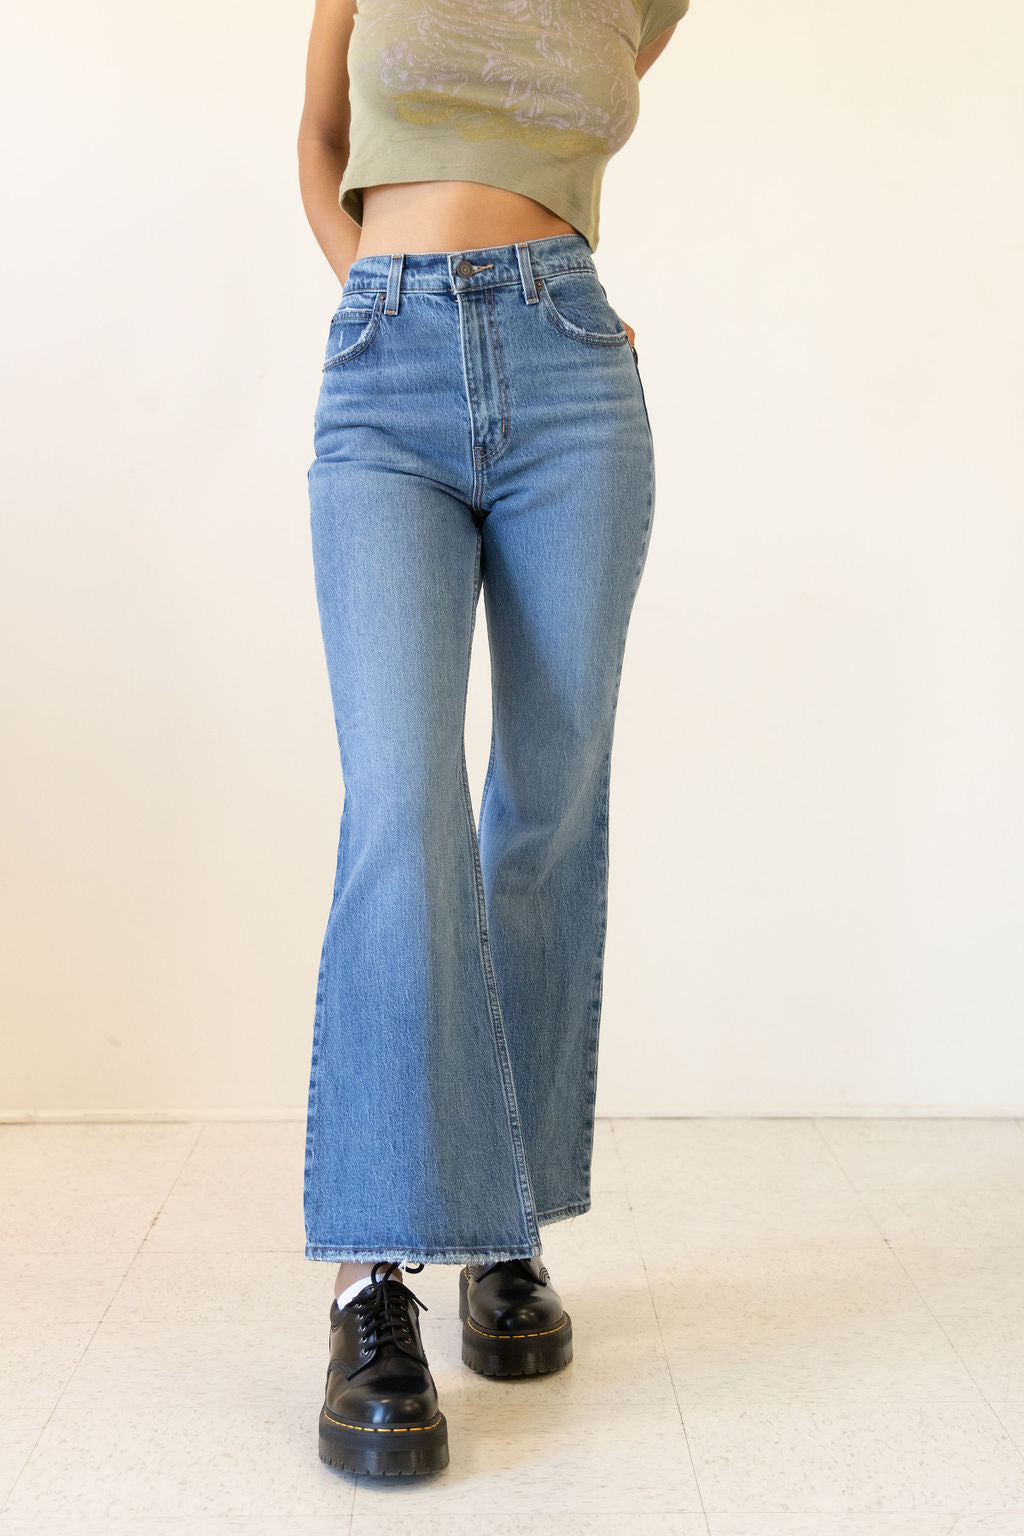 70s High Flare Long Bottom Jeans by Levi's